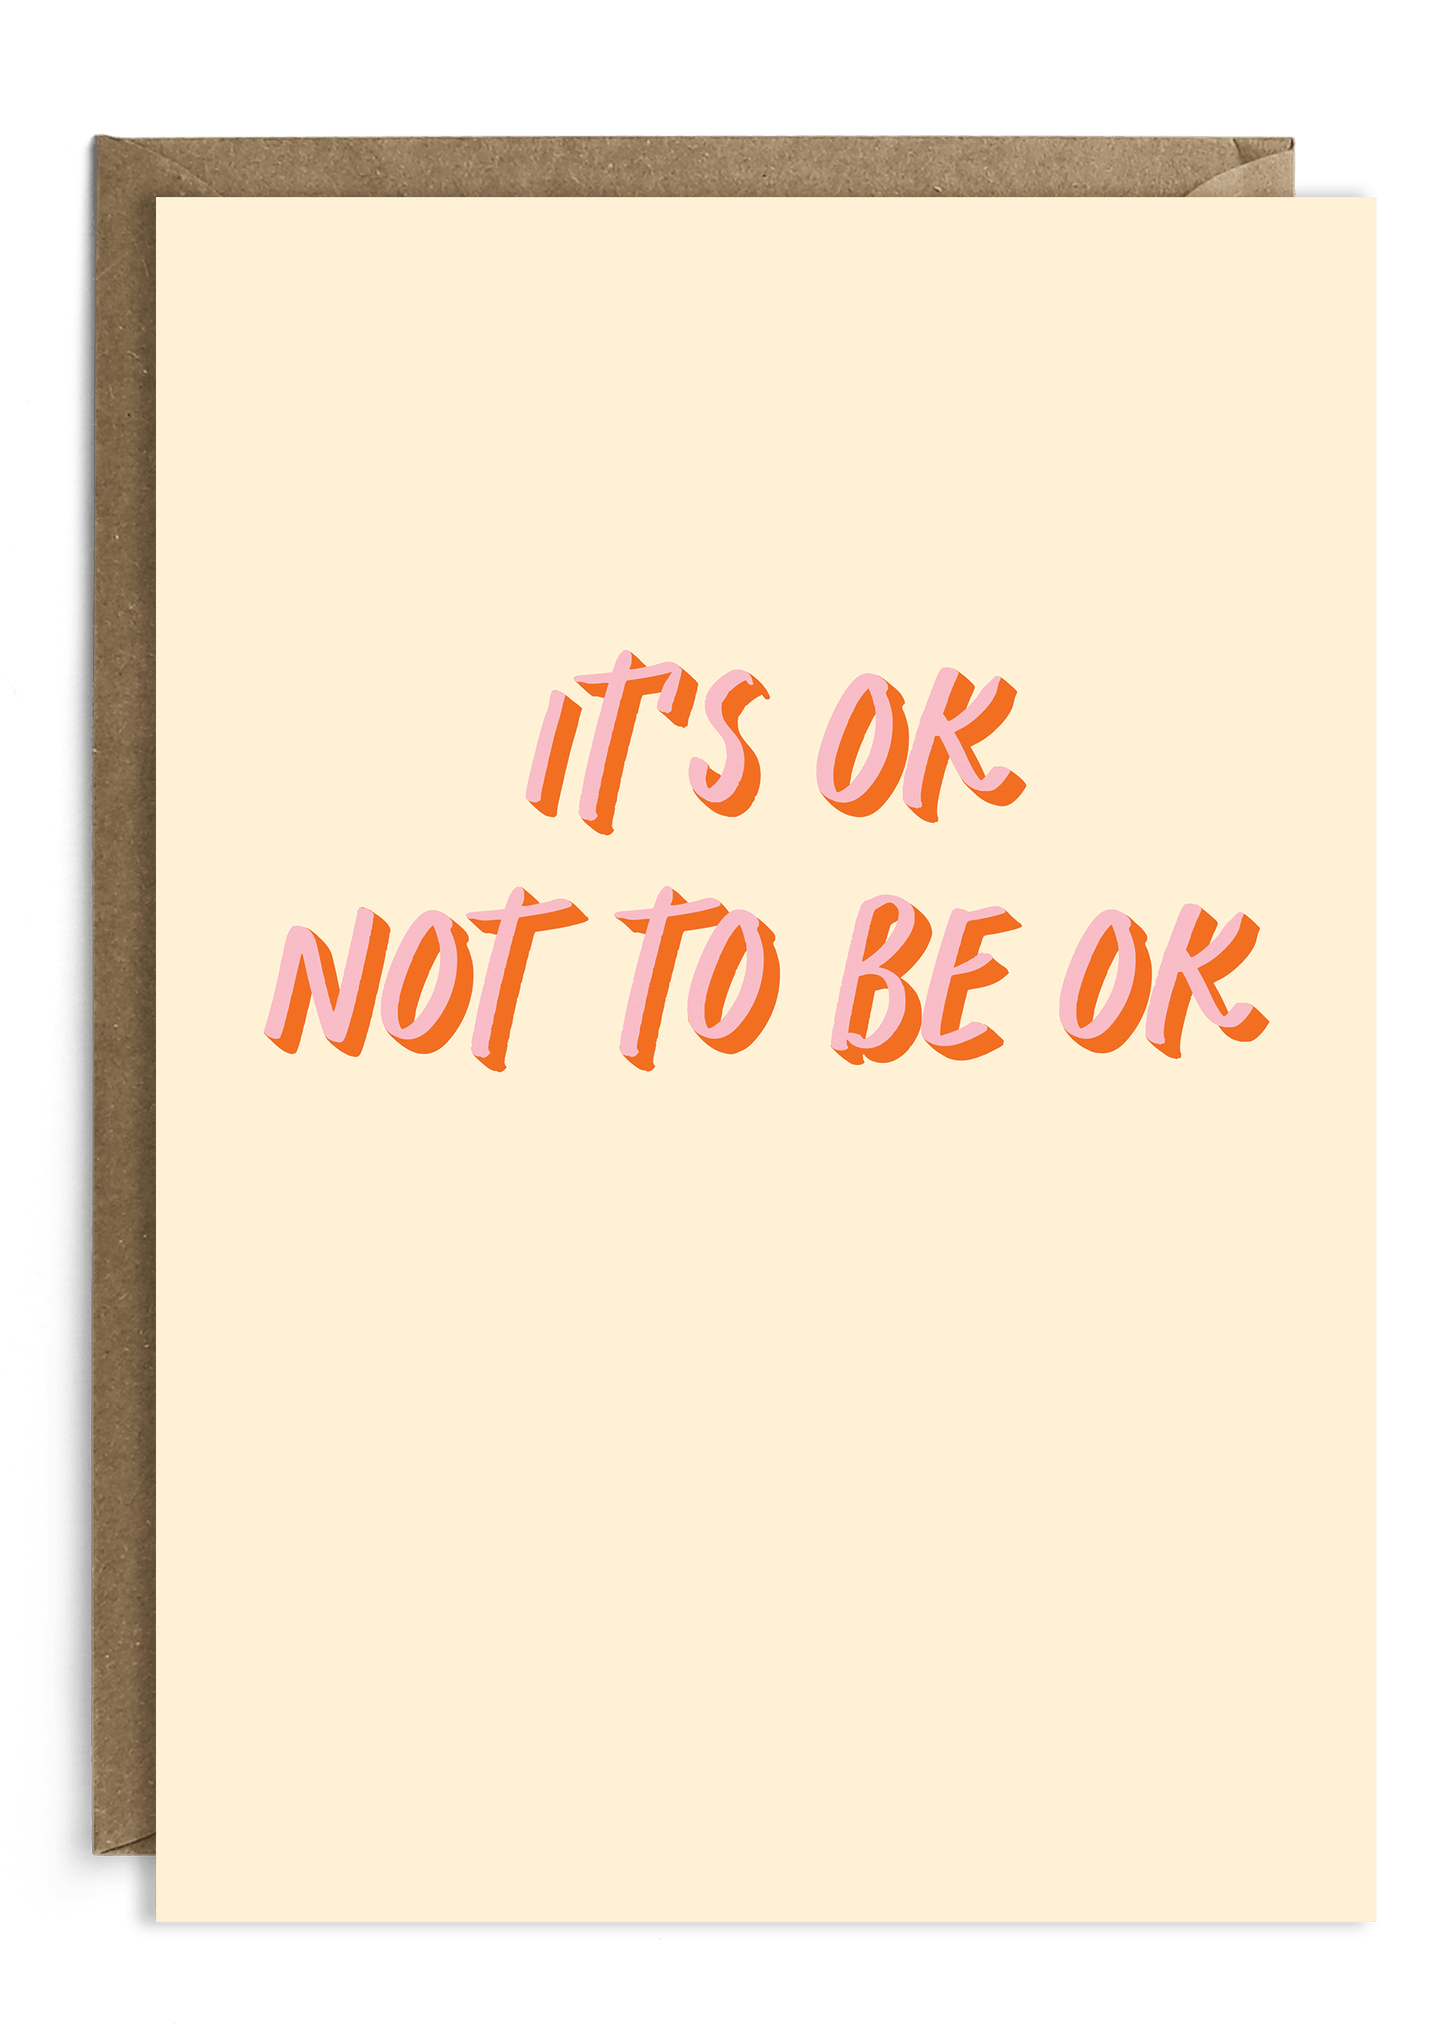 It's OK not to be OK - Mental Health Card